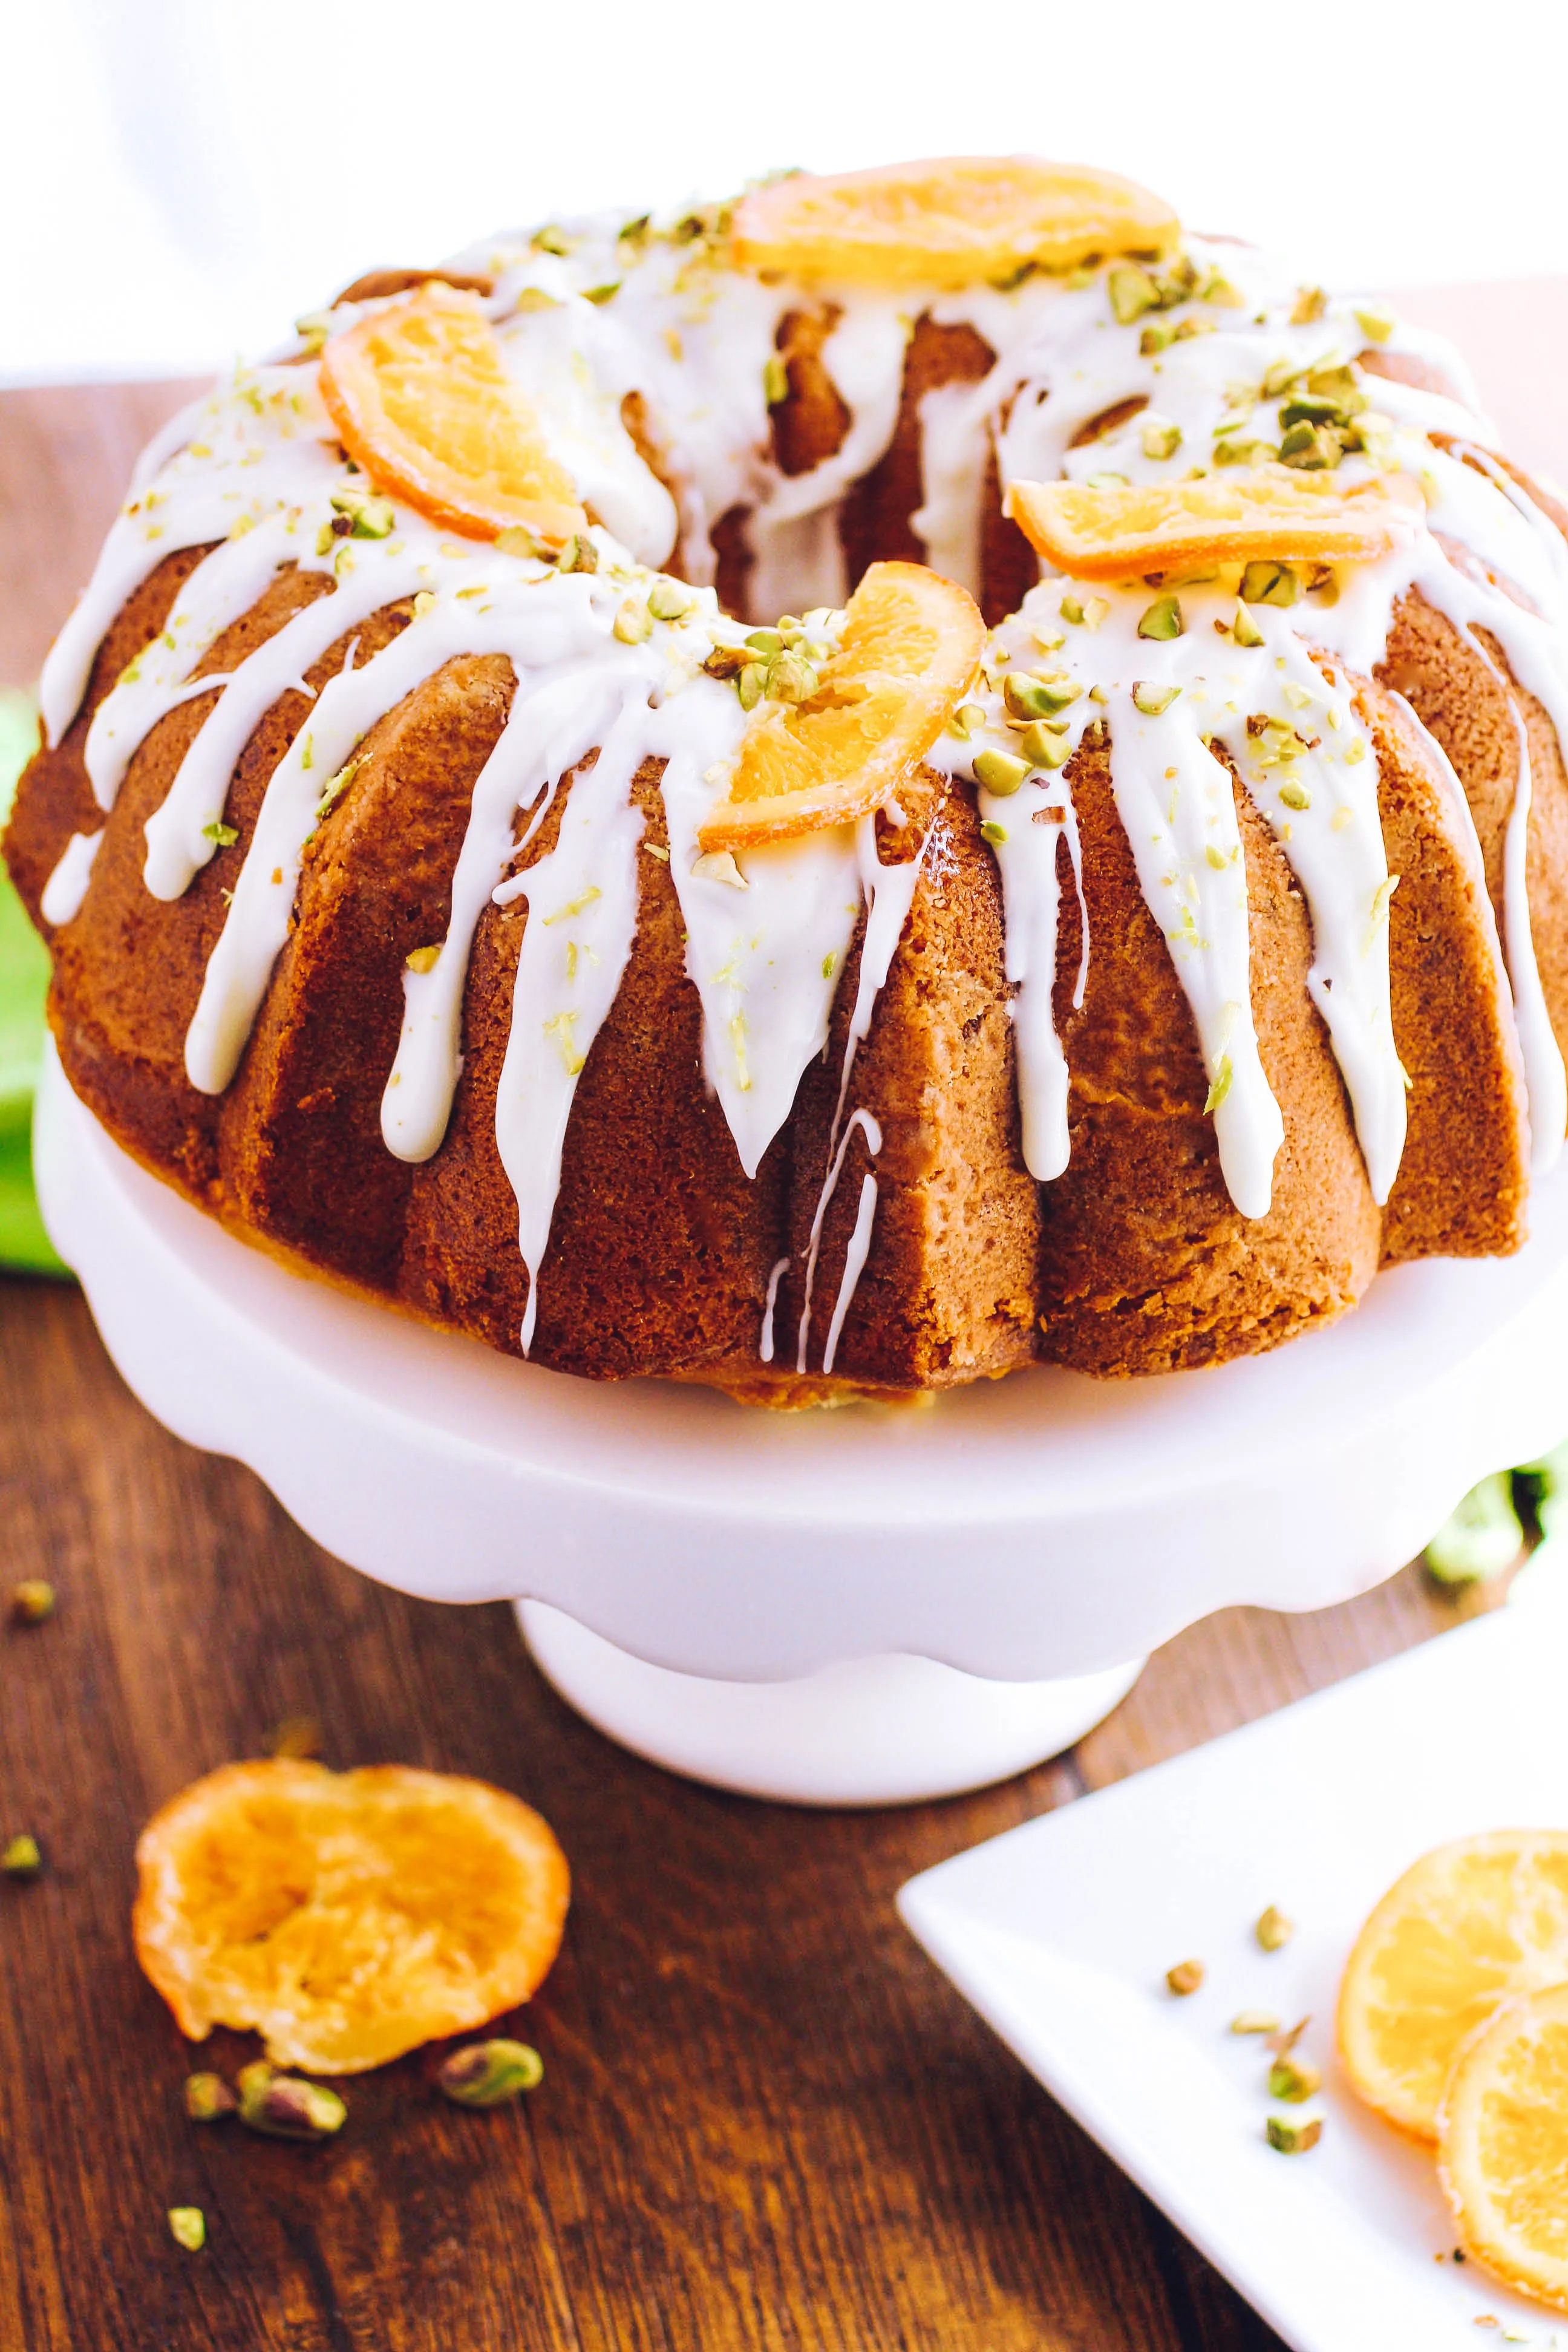 Orange Marmalade-Pistachio Bundt Cake is a pretty cake perfect for spring. You'll love the flavors!